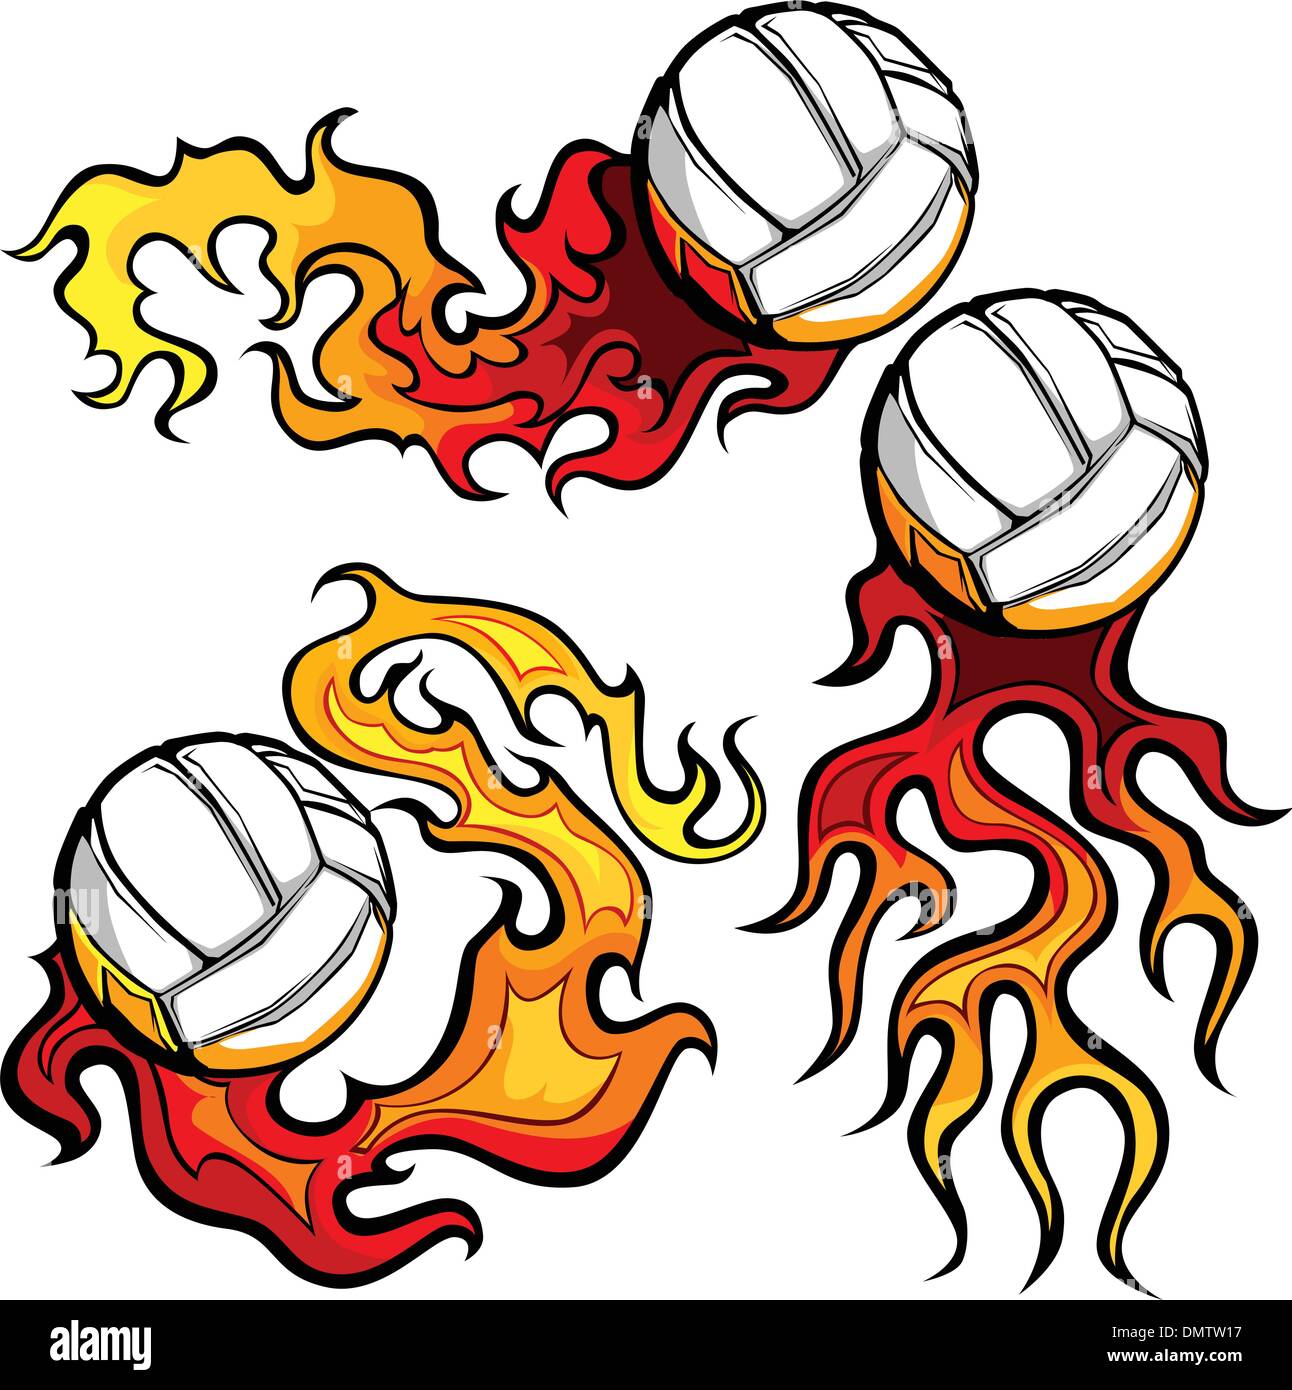 Volleyballs with Flames Vector Images Stock Vector